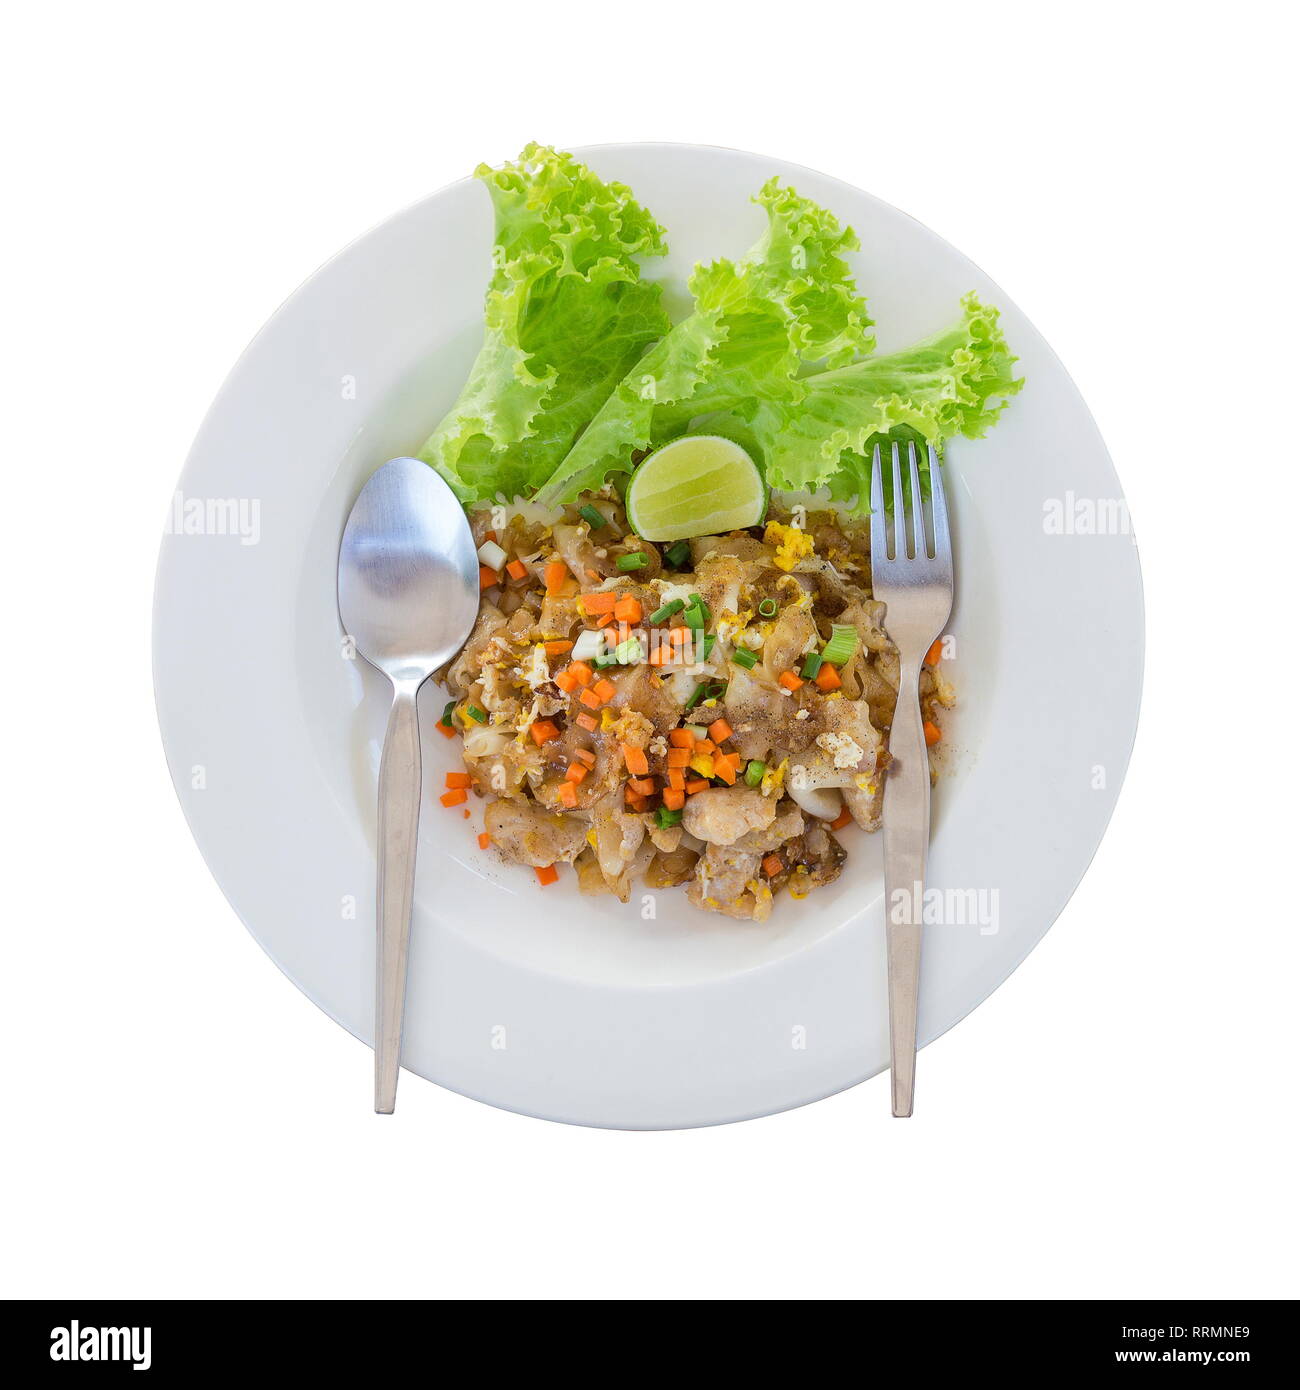 Top view of Thai Fried Noodles 'Pad Thai' with vegetables isolated on a white background. Stock Photo